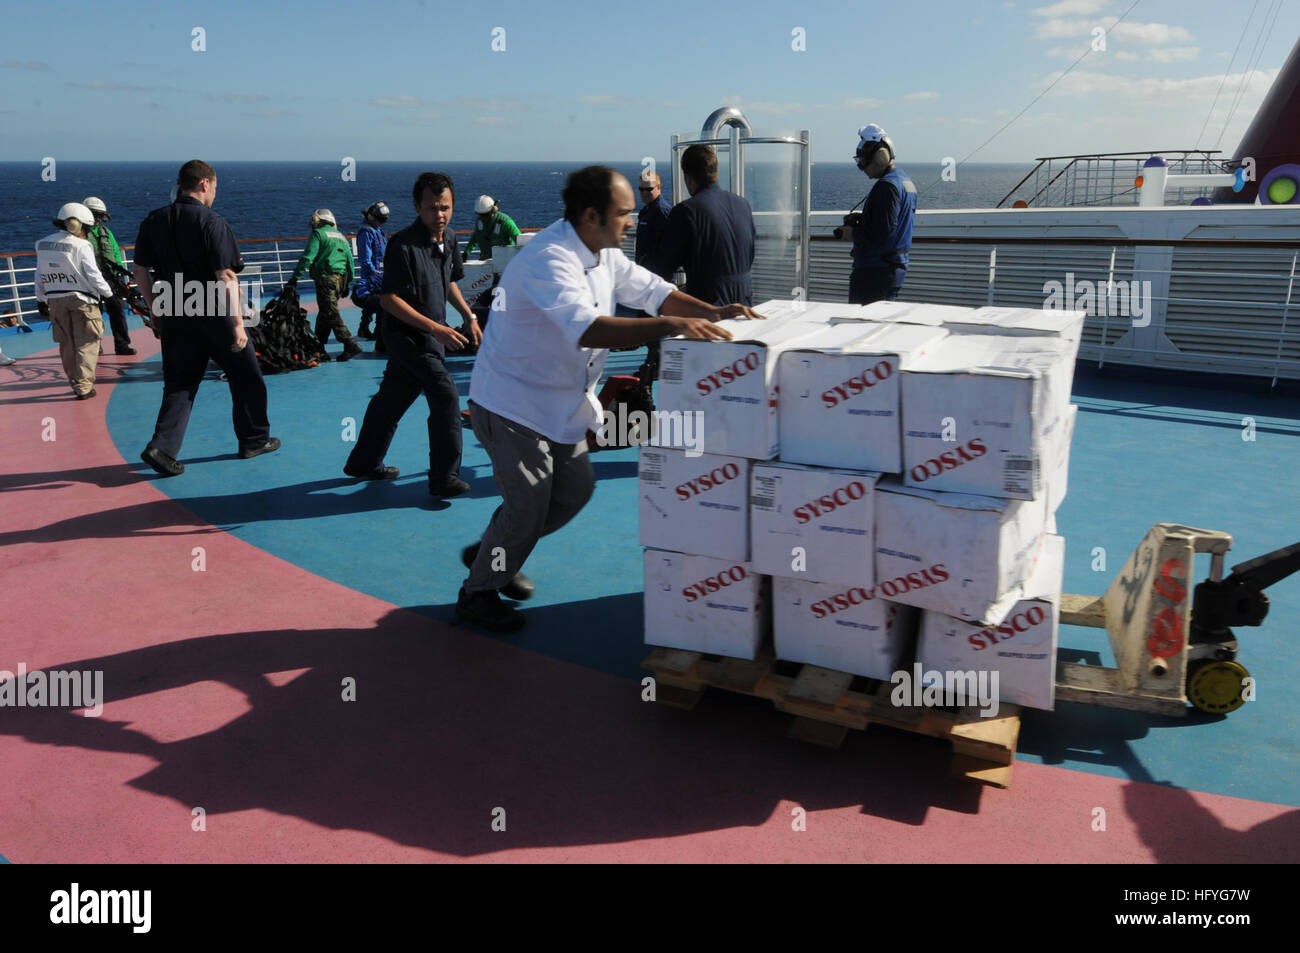 Crew-members of Carnival cruise ship C/V Splendor unload food and water sent from the aircraft carrier USS Ronald Reagan (CVN 76). Ronald Reagan was diverted from its current training maneuvers at the direction of Commander U.S. Third Fleet, and at the request of the U.S. Coast Guard, to a position south near the Carnival cruise ship C/V Splendor to facilitate the delivery of 4,500 pounds of supplies to the cruise ship. Early Monday, CV Splendor reported it was dead in the water 150 nautical miles southwest of San Diego. (Photo by: Petty Officer 3rd Class Kevin Gray) USS Ronald Reagan Action D Stock Photo